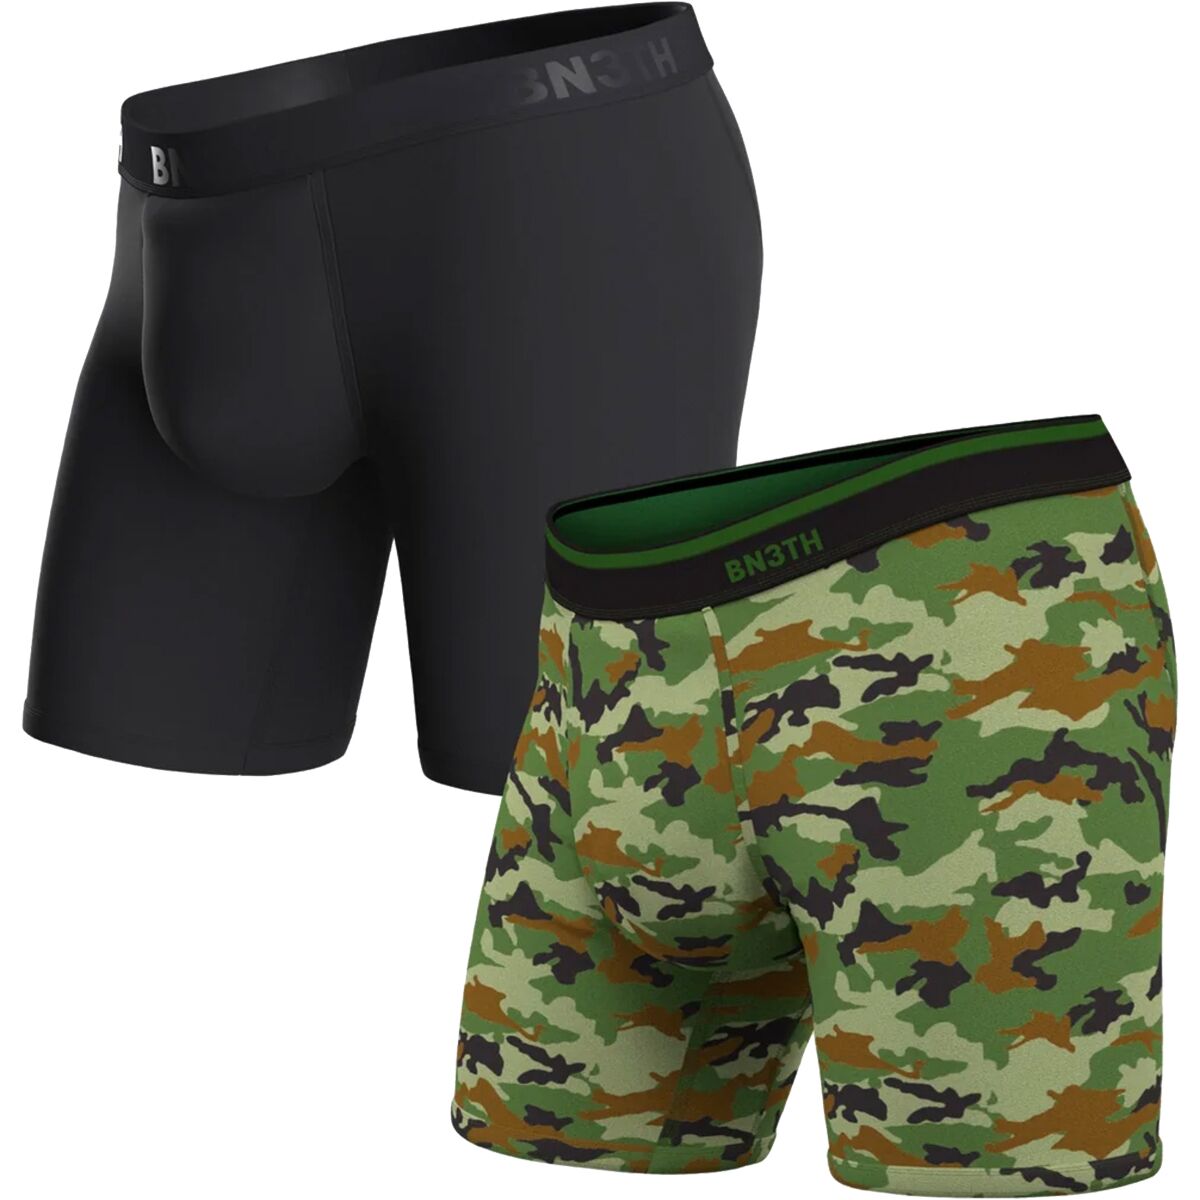 BN3TH Apparel - THURSDAY DAILY DEAL: Get all Pro 2.0 Boxer